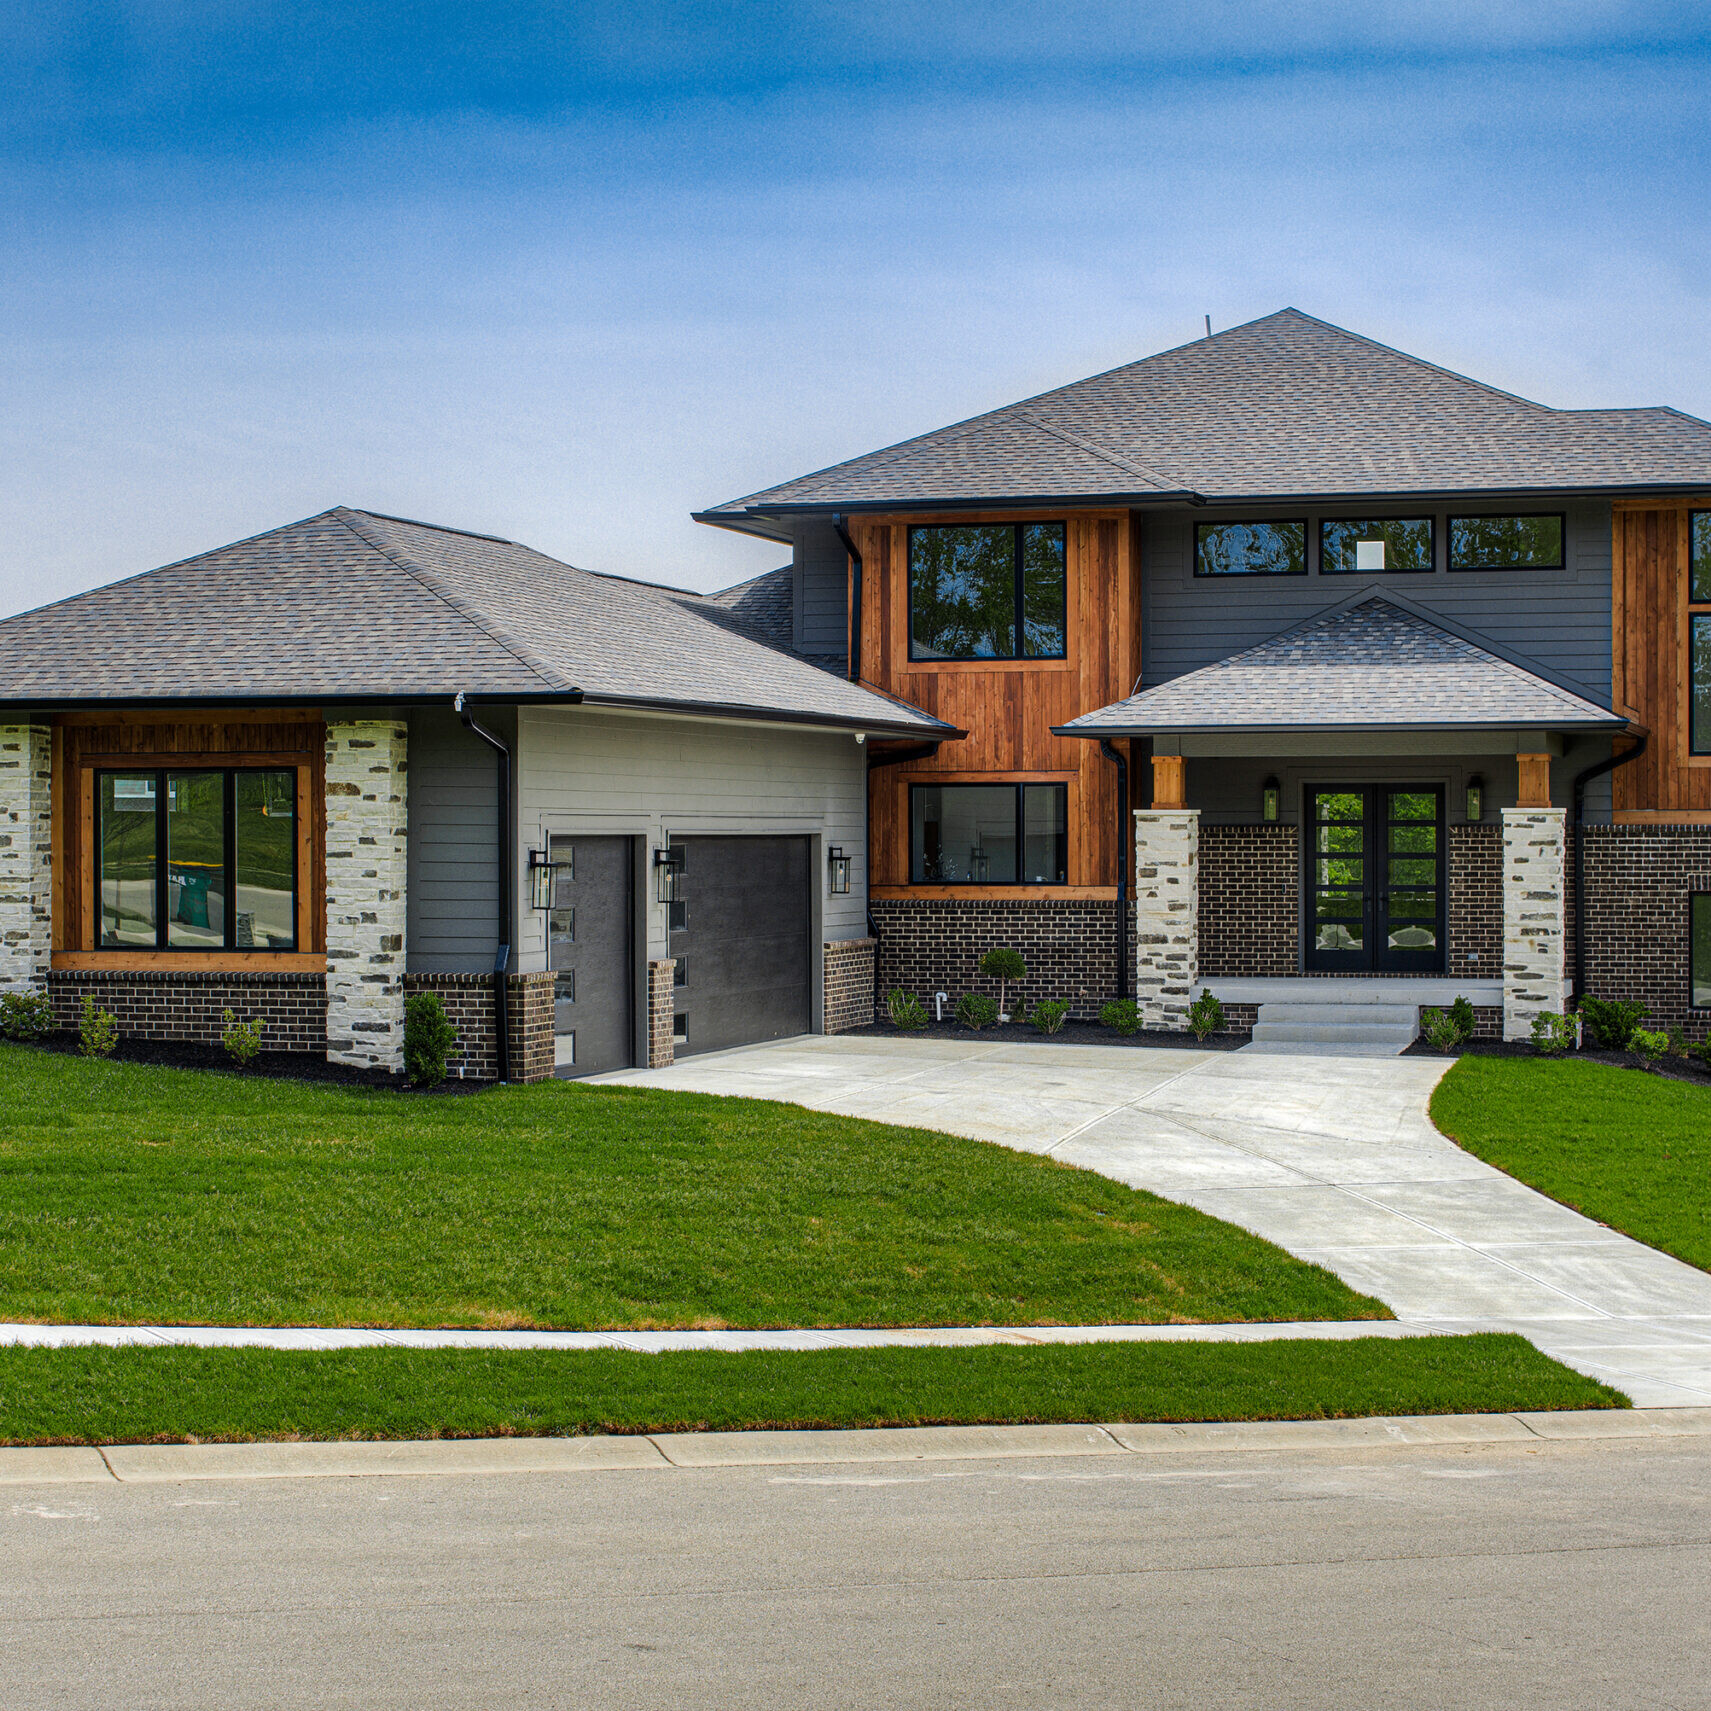 A custom home with a driveway and grass in front of it.